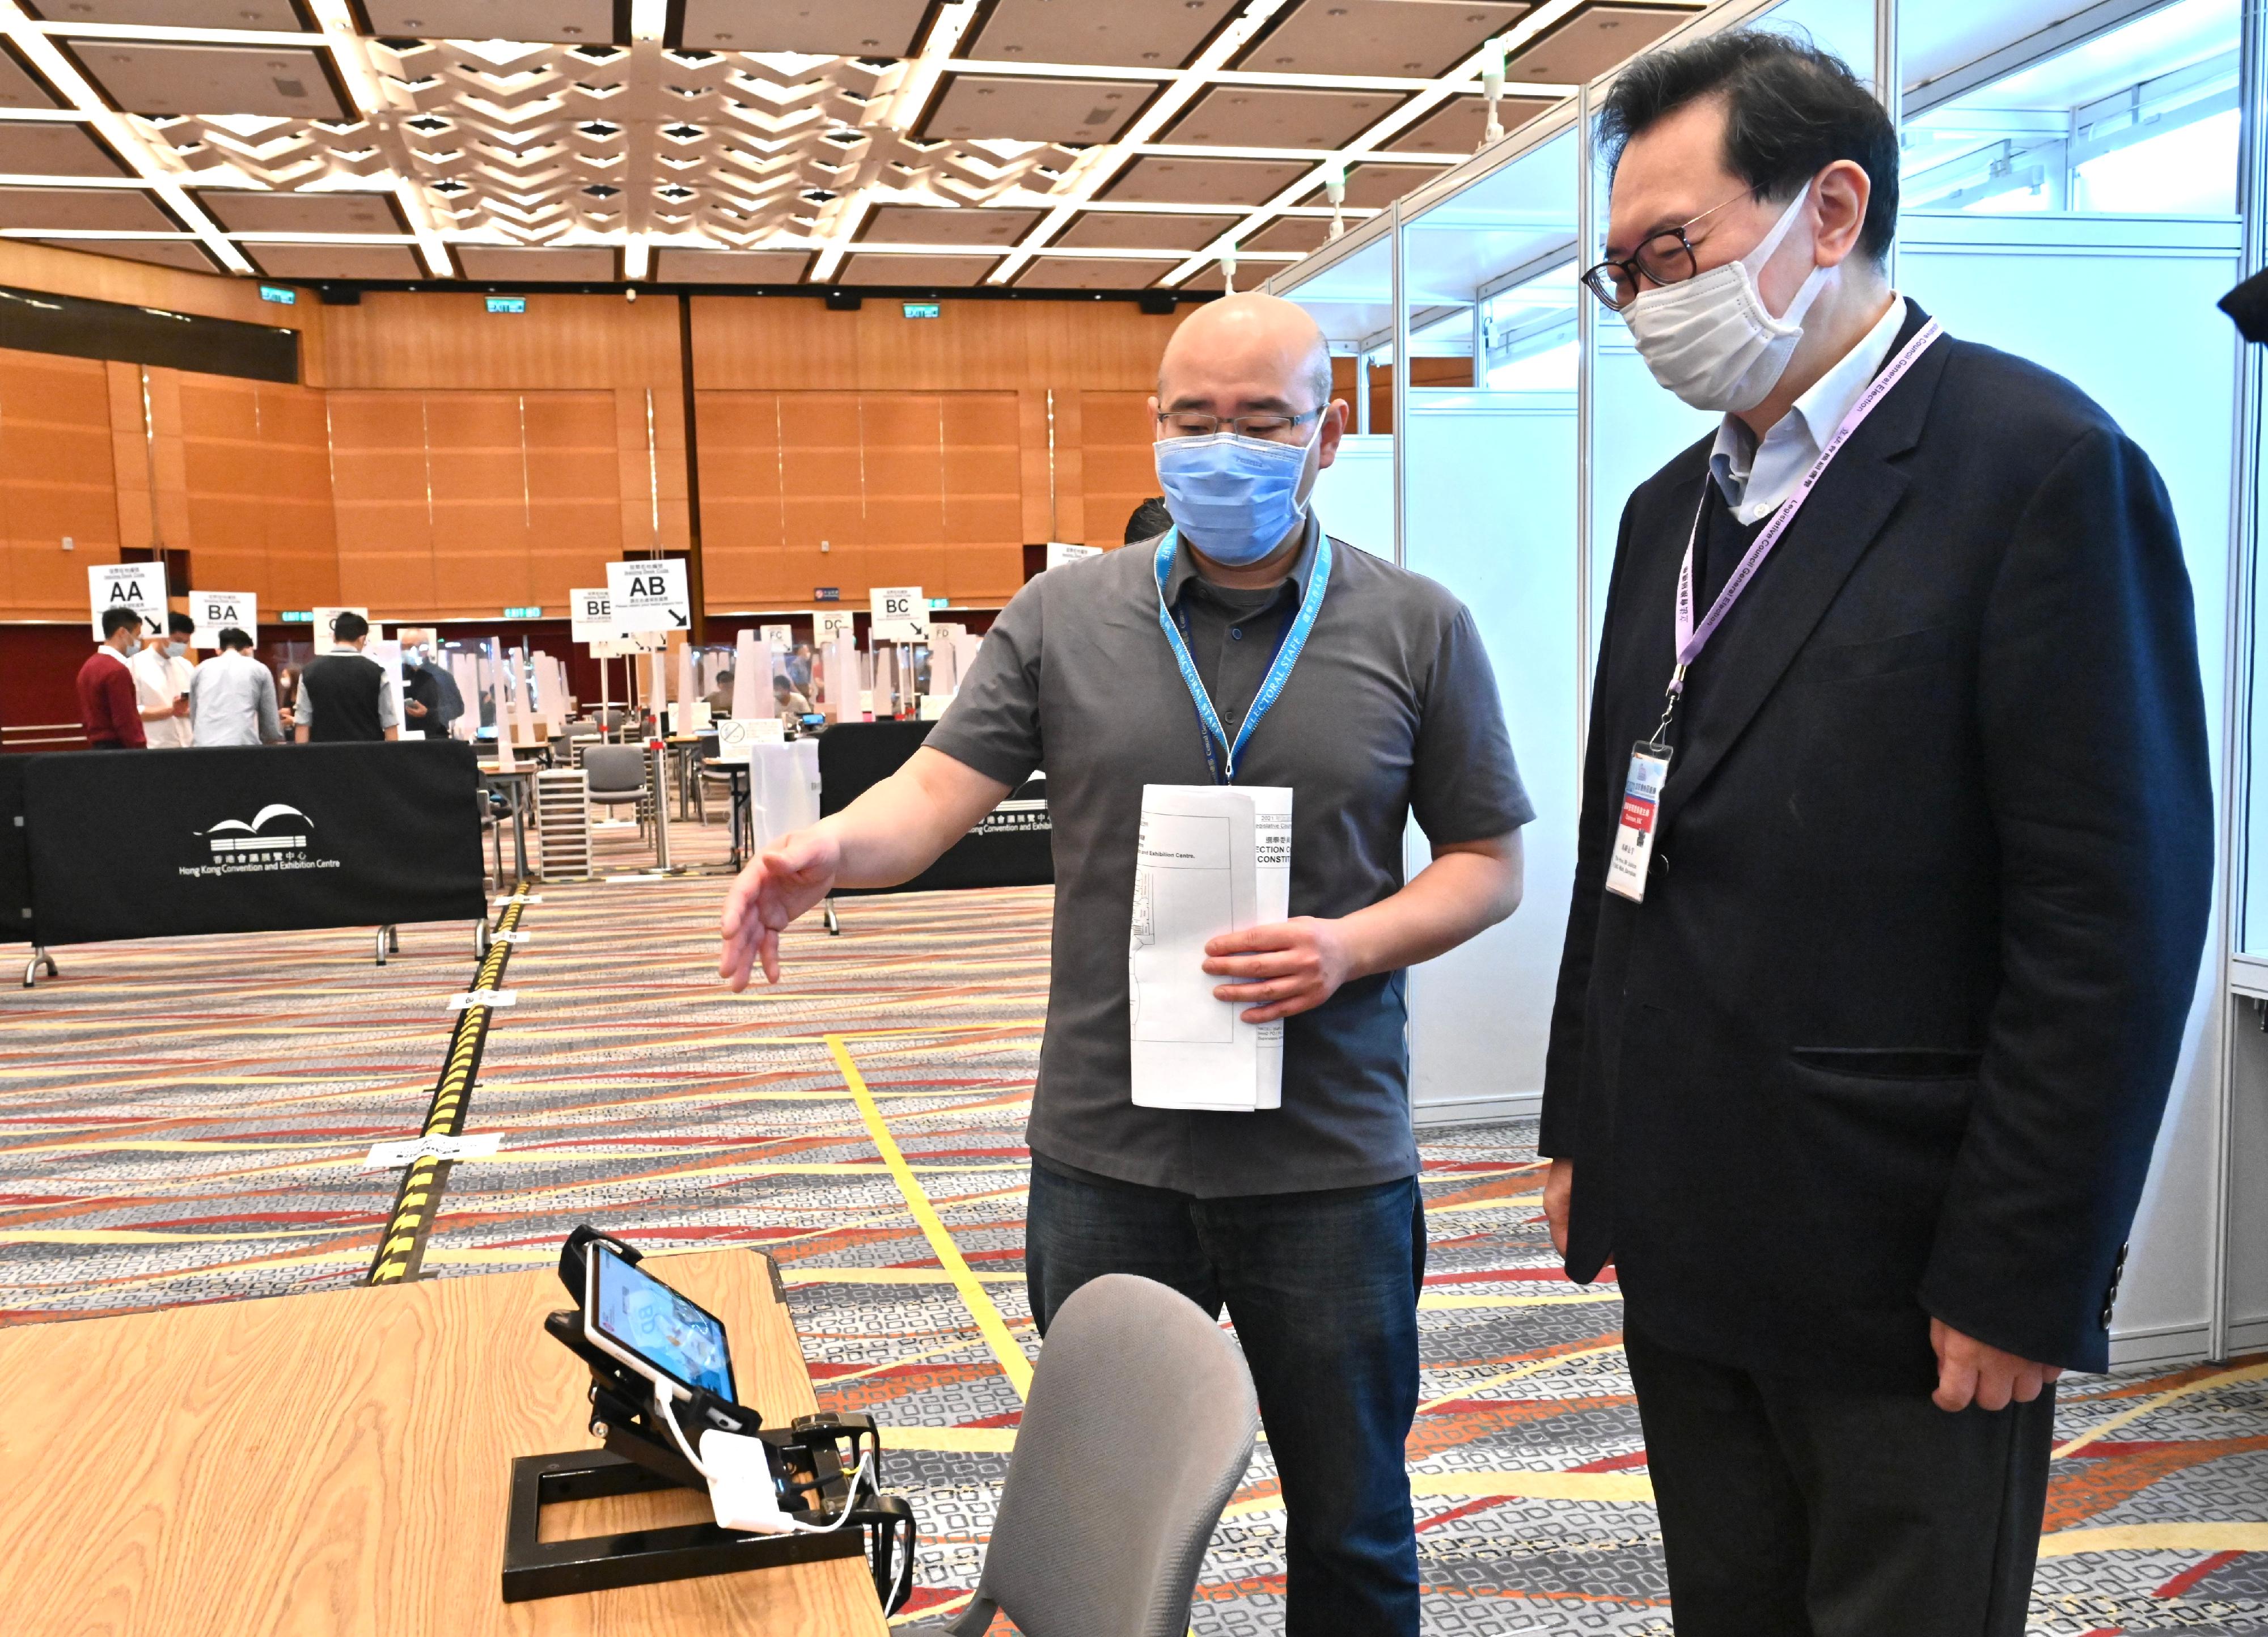 The Chairman of the Electoral Affairs Commission, Mr Justice Barnabas Fung Wah (right), visits the Election Committee Constituency polling station of the 2021 Legislative Council General Election at the Hong Kong Convention and Exhibition Centre this morning (December 18) to inspect the preparatory work. He is briefed by the Presiding Officer. 